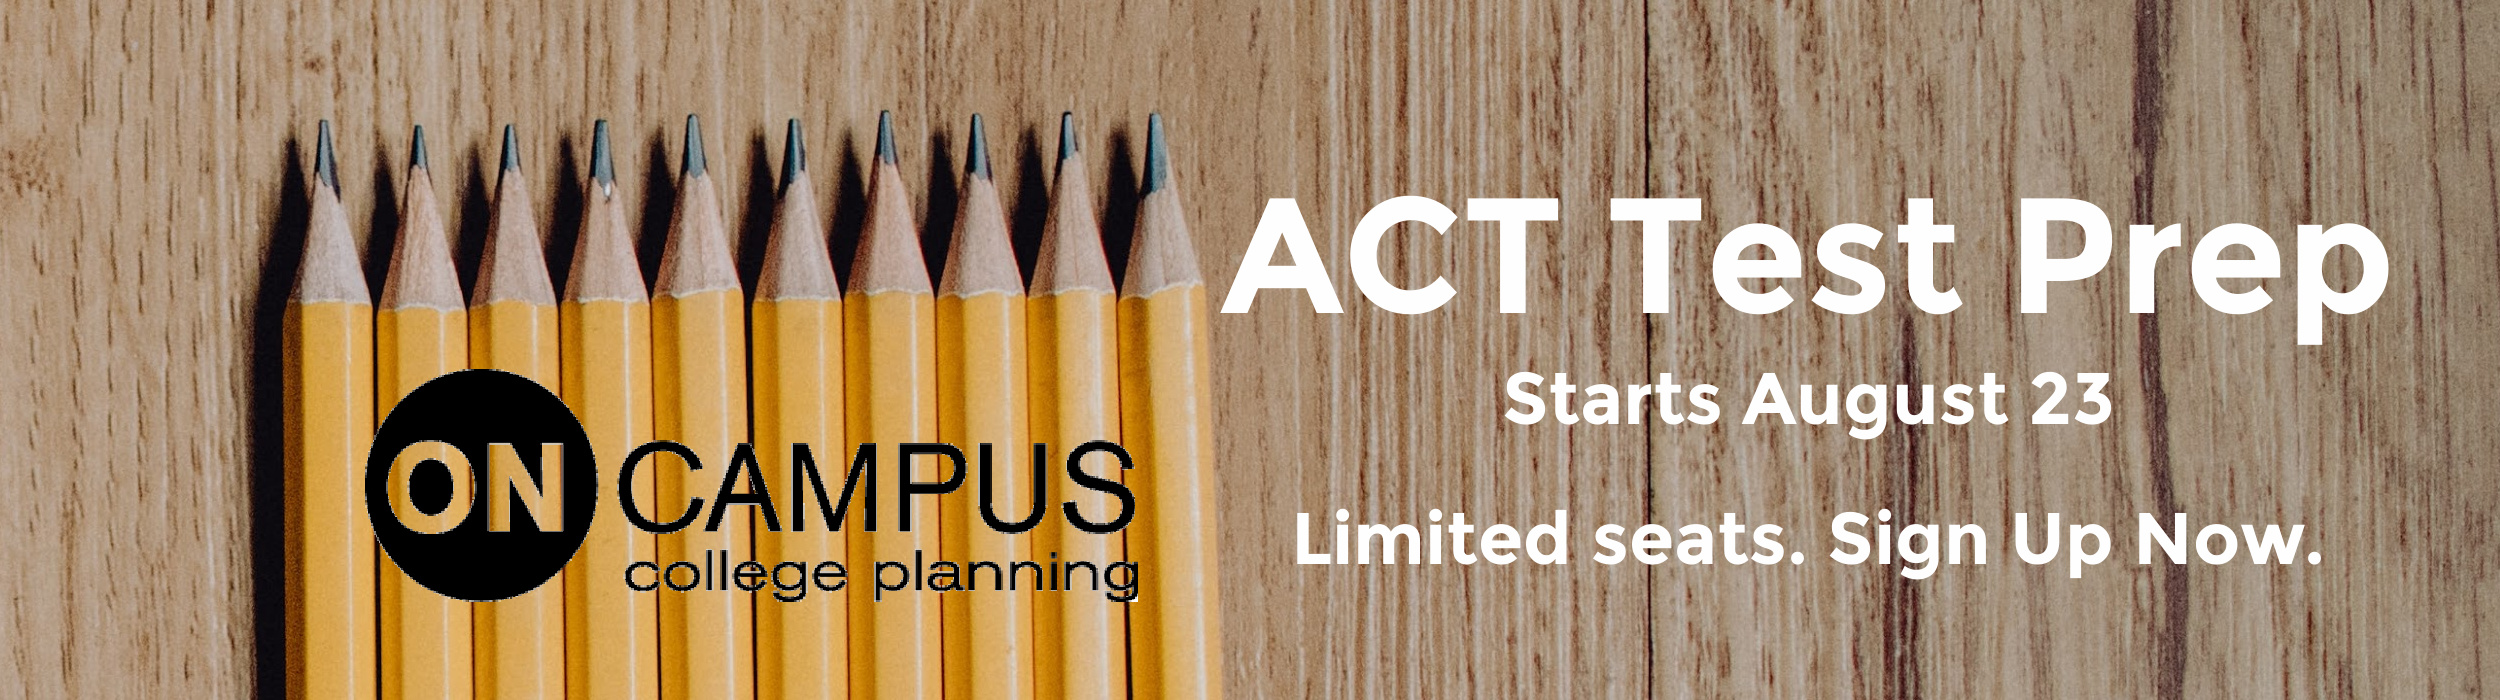 ACT Test Prep March 2021